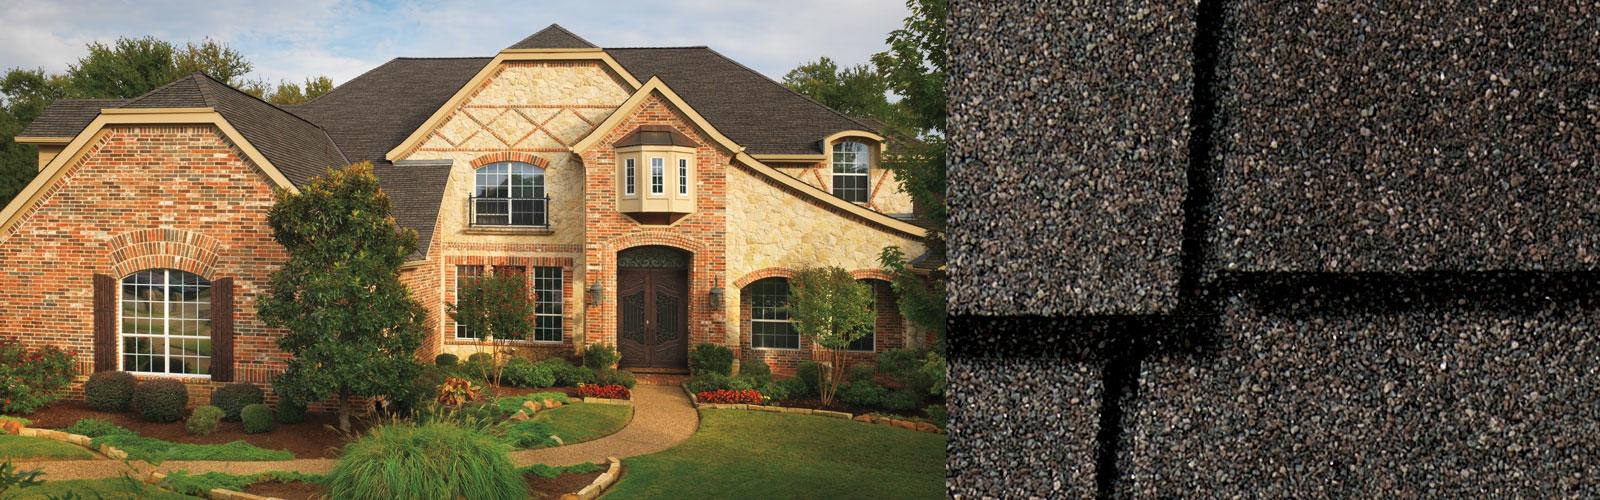 Certified Roofing & Siding Specialist Images